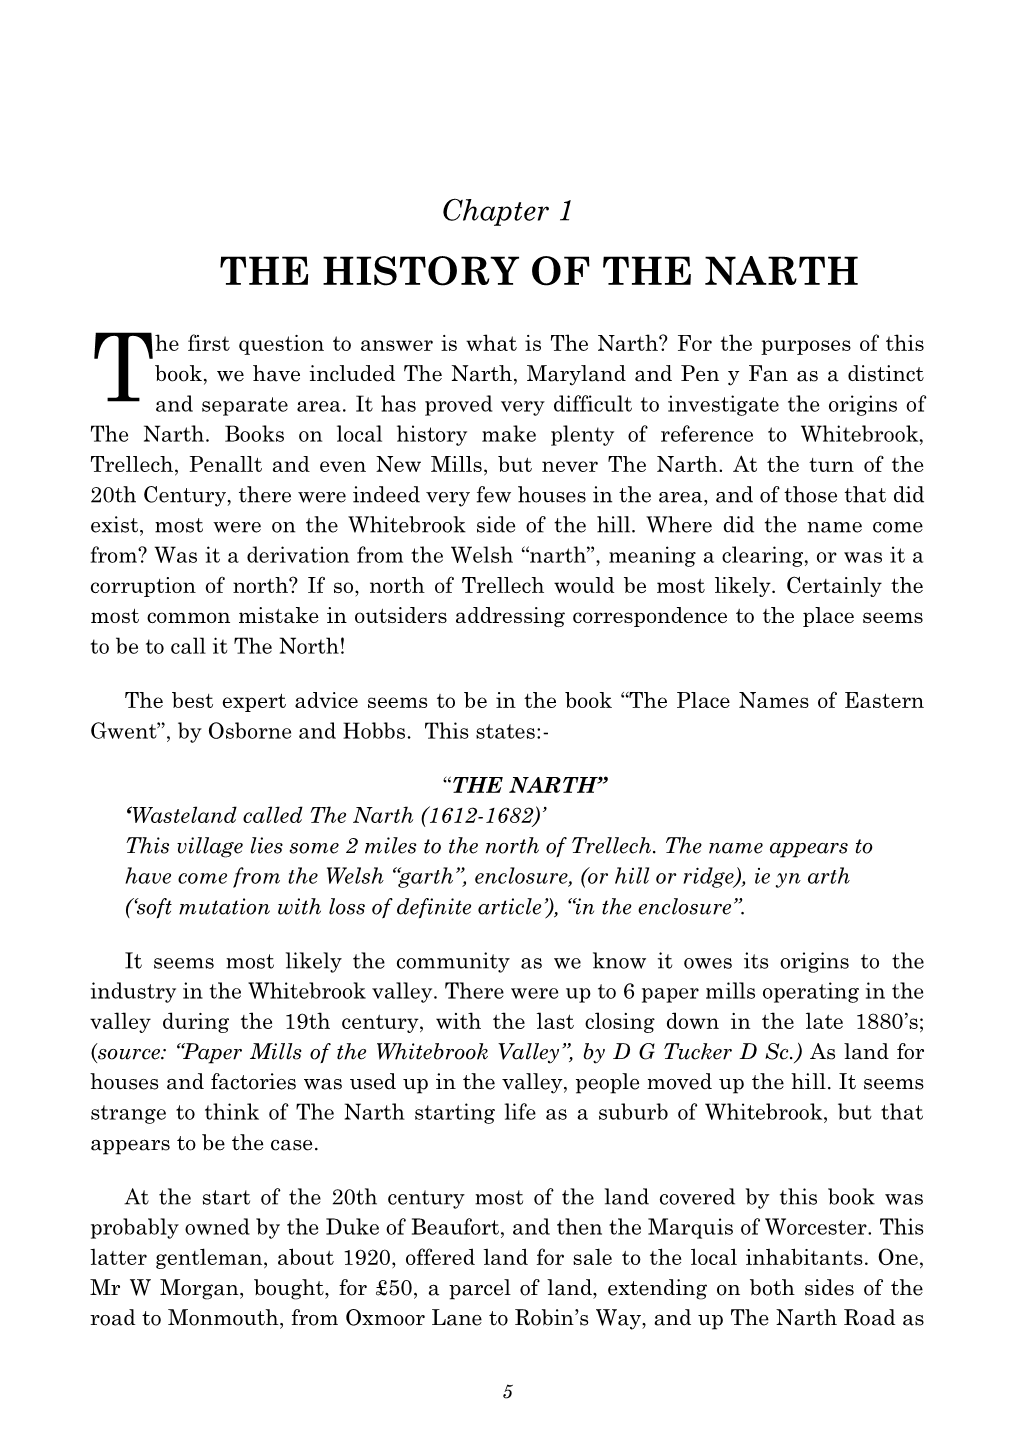 The History of the Narth